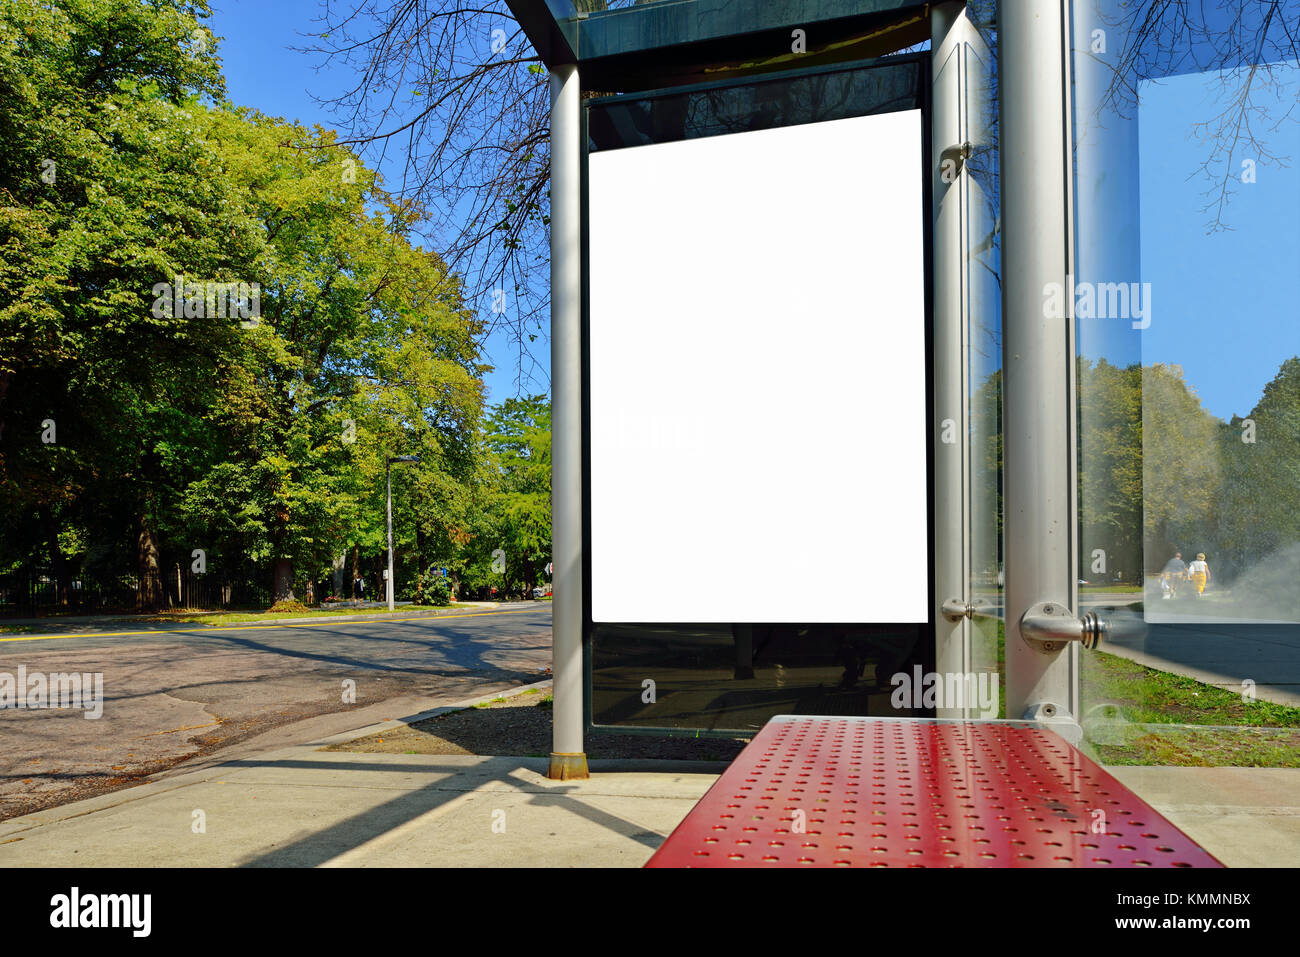 Bus stop advertising. Blank billboard on bus shelter, poster size, vertical Stock Photo